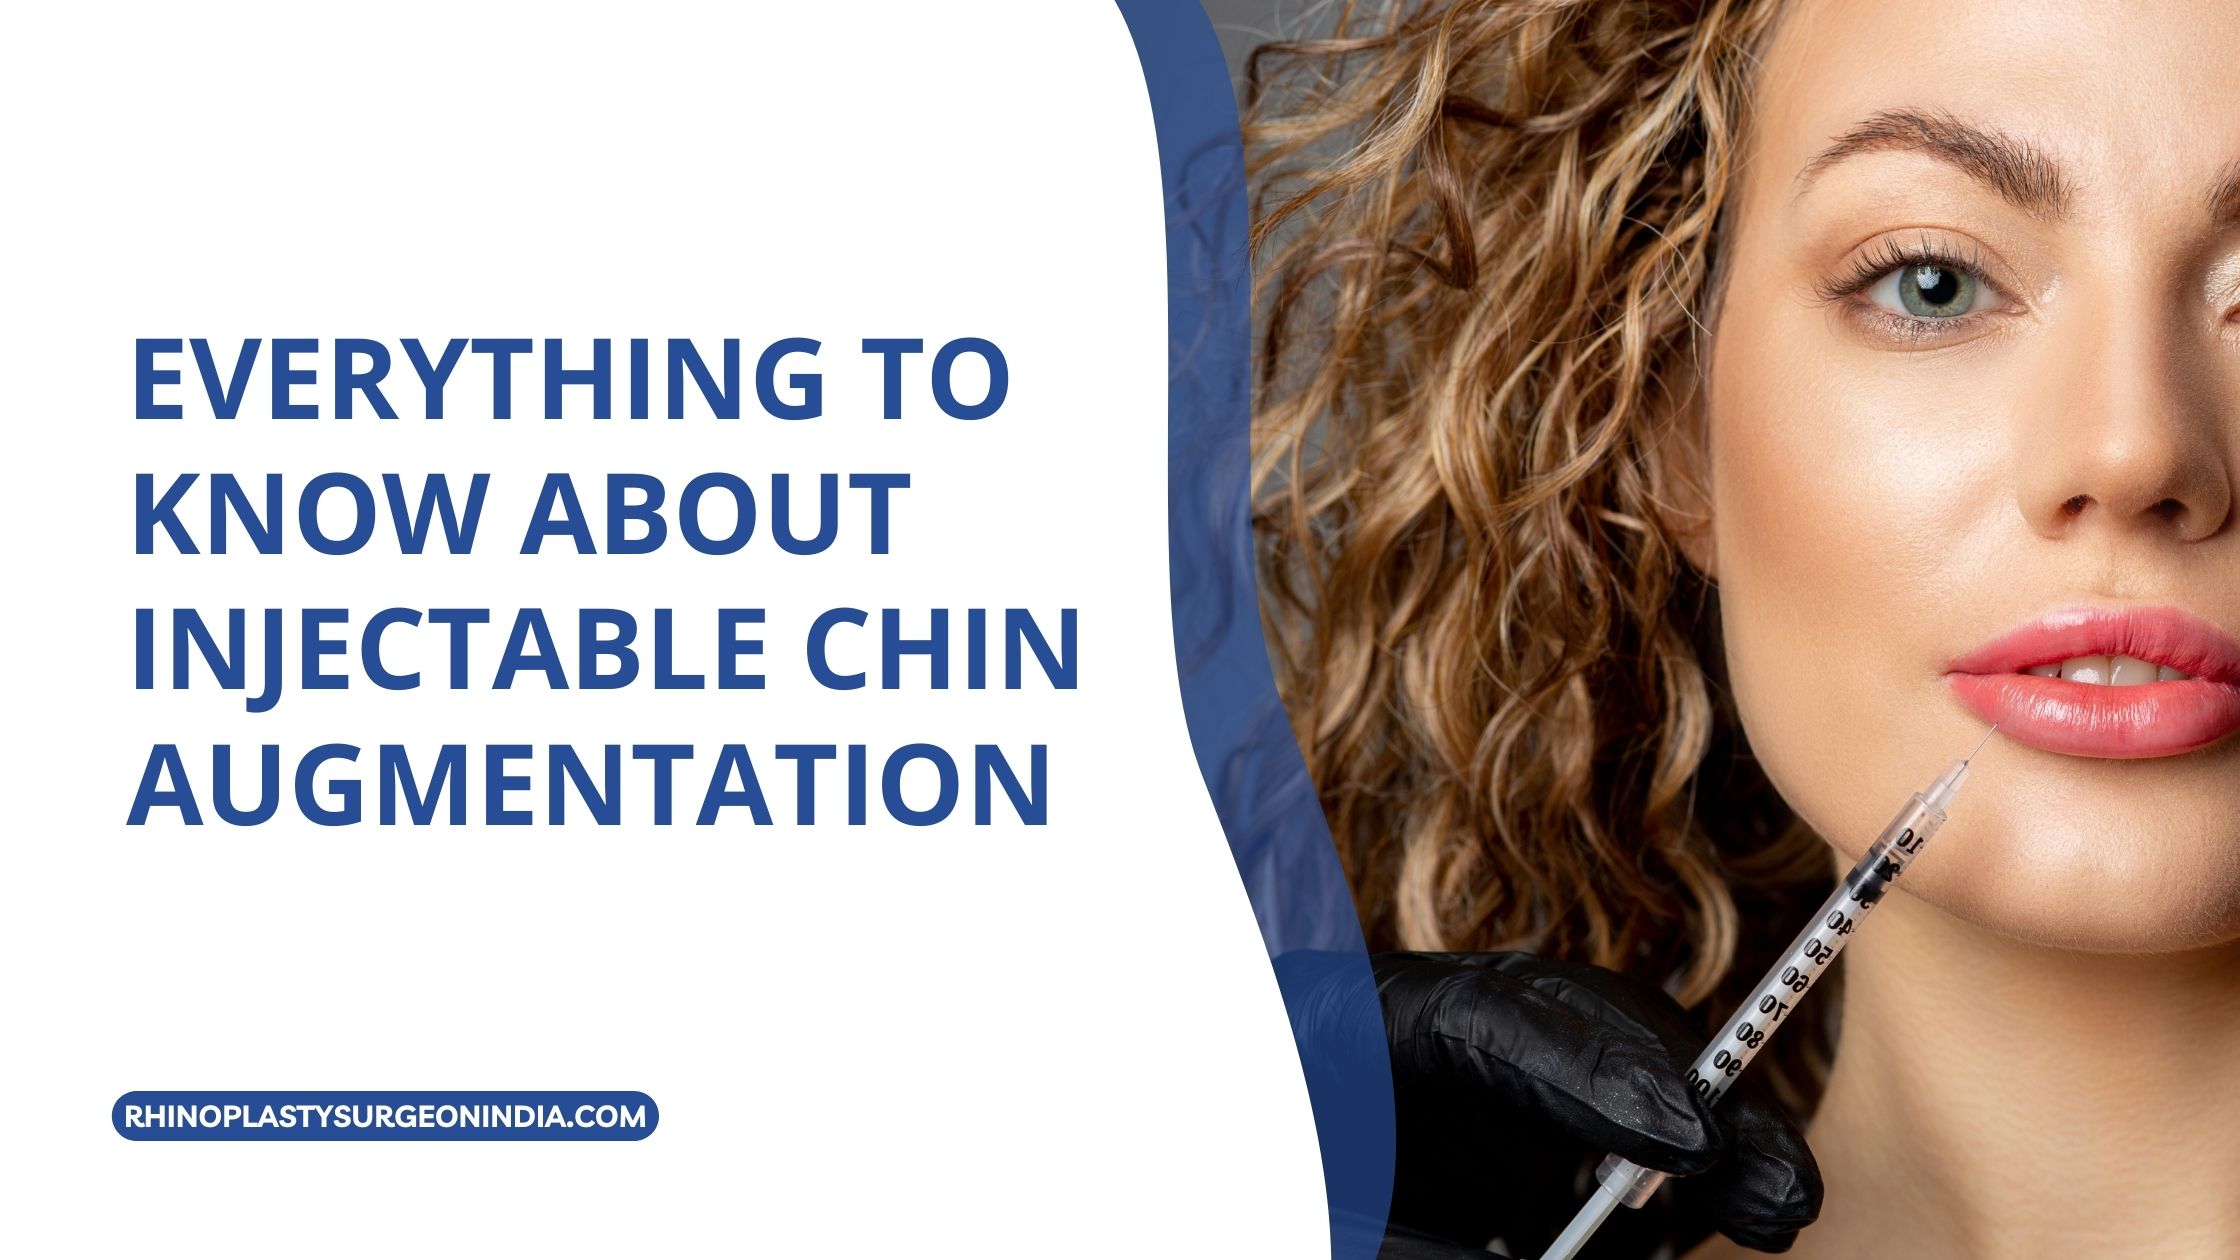 Everything to know about Injectable Chin Augmentation